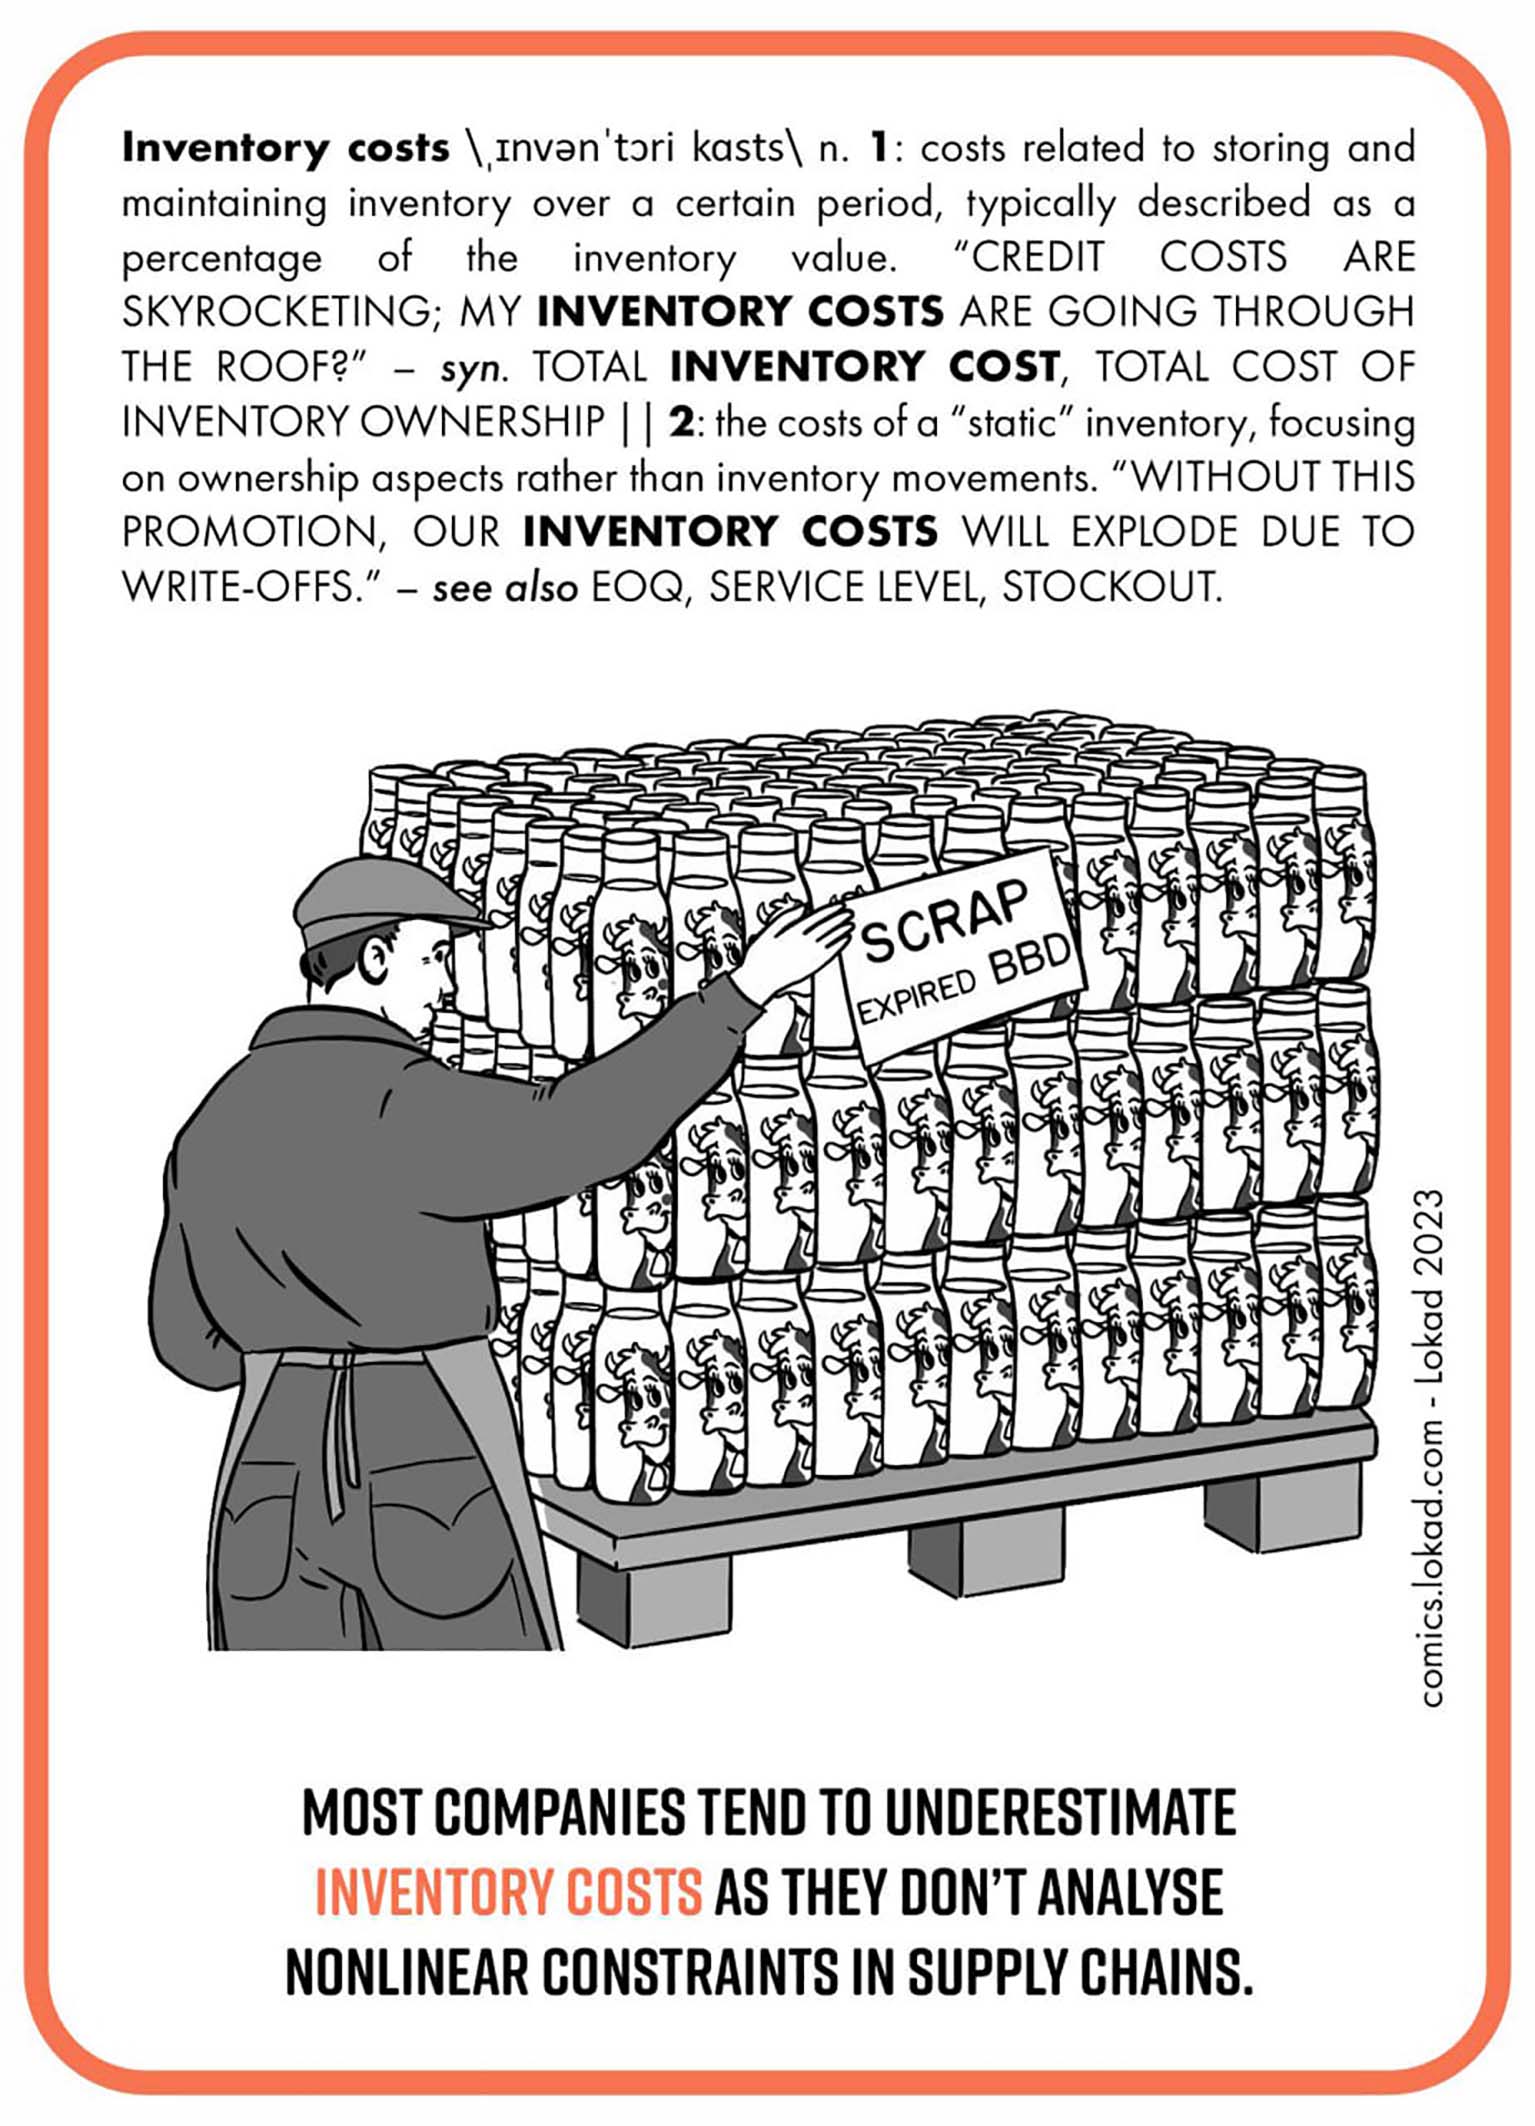 The flashcard is about Inventory Costs in supply chain management. It defines Inventory Costs as costs related to storing and maintaining inventory over a certain period, typically described as a percentage of the inventory value. It cites skyrocketing credit costs and the potential for costs to go through the roof as concerns. It also talks about the costs of a static inventory, focusing on ownership rather than inventory movement, warning that without promotion, inventory costs will explode due to write-offs. The flashcard implies that most companies tend to underestimate inventory costs as they do not analyze nonlinear constraints in supply chains. The image portion of the flashcard depicts a man in a coat marking a stack of goods as scrap due to expired best-before dates, suggesting a lack of efficient inventory management and the financial loss associated with unsold or expired products. The bottom line suggests that underestimating inventory costs is a common oversight in supply chain management.